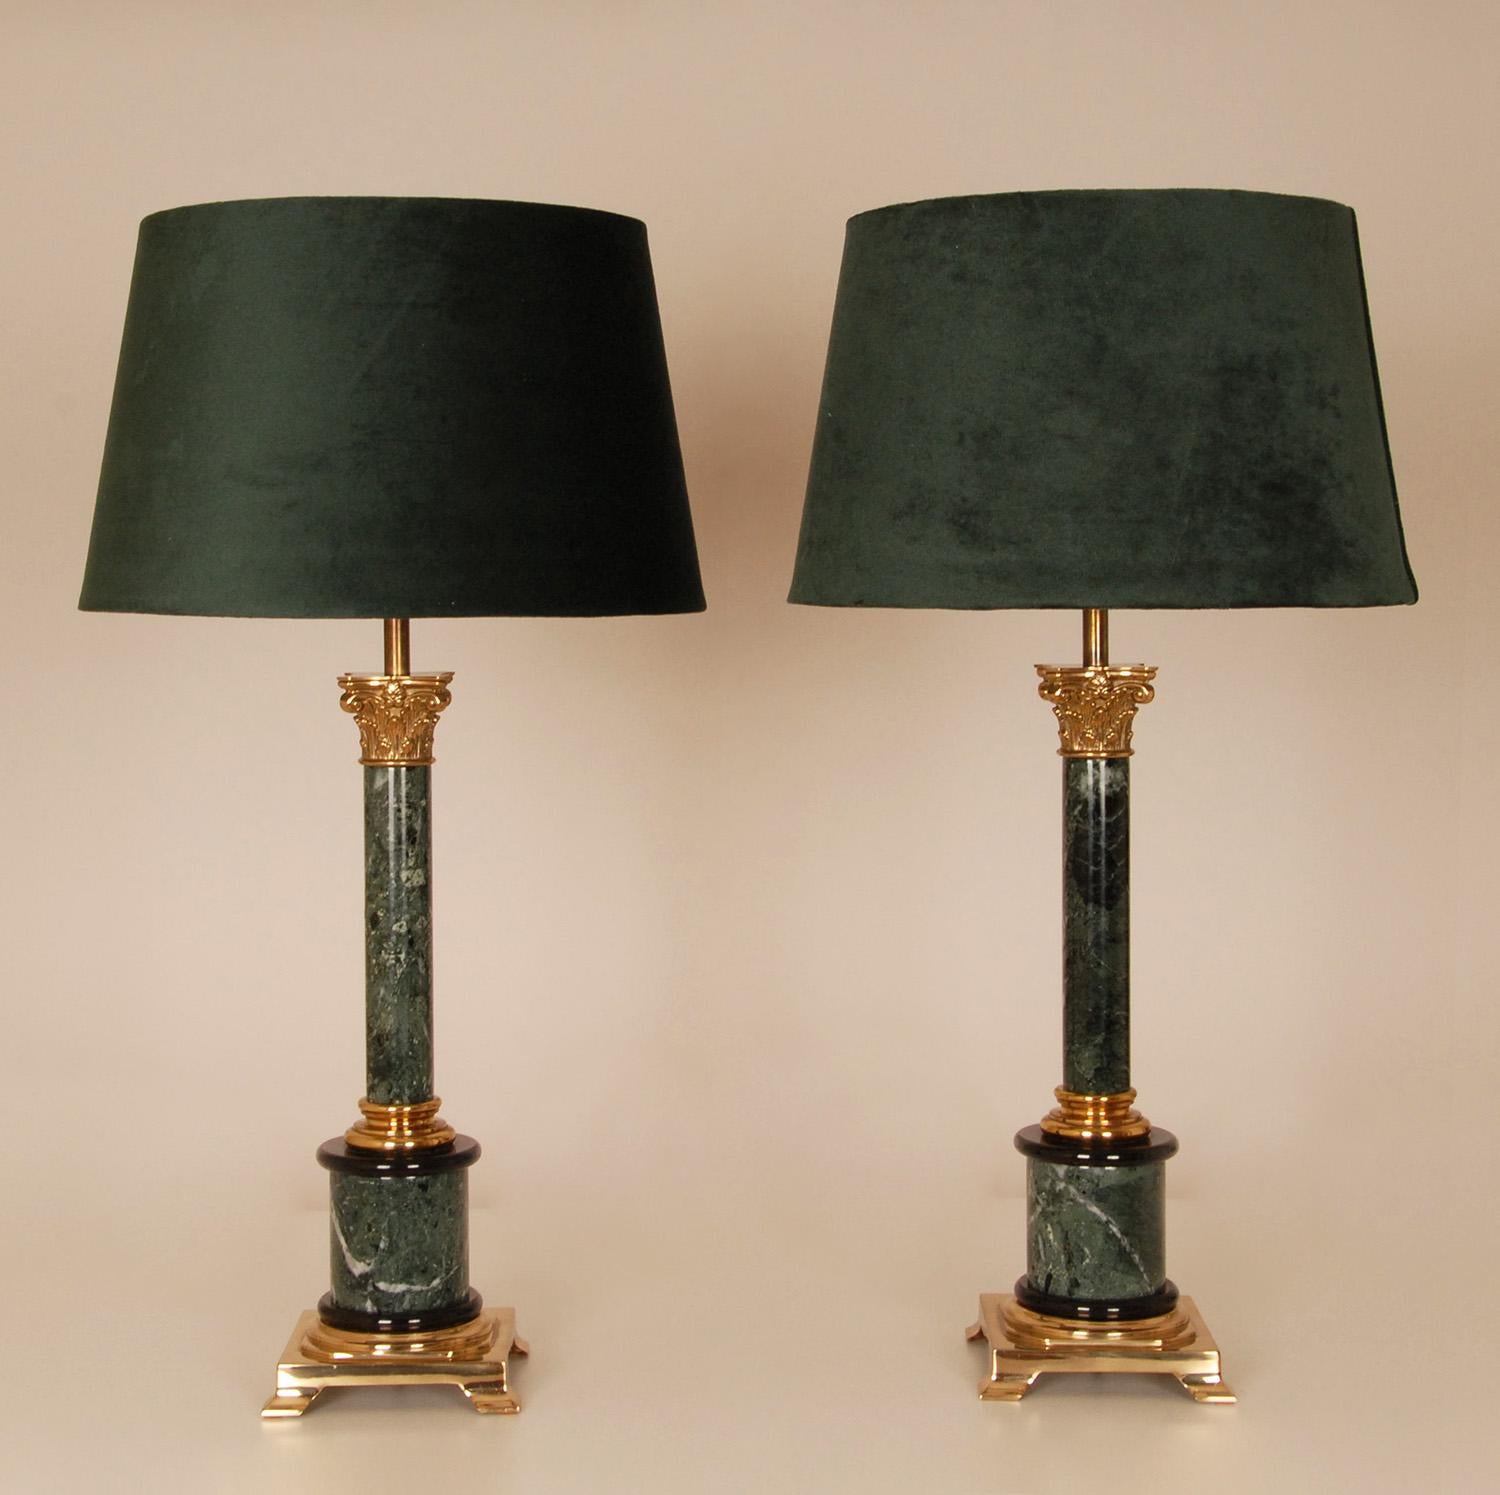 Vintage High end Italian green marble and gold gilded bronze corinthian column table lamps
Style: Napoleonic, Empire, Regency, Neoclassical, Antique, Vintage, classic table lamps
Design: In the manner of E.F. Caldwell, Chapman, Maison Charles,